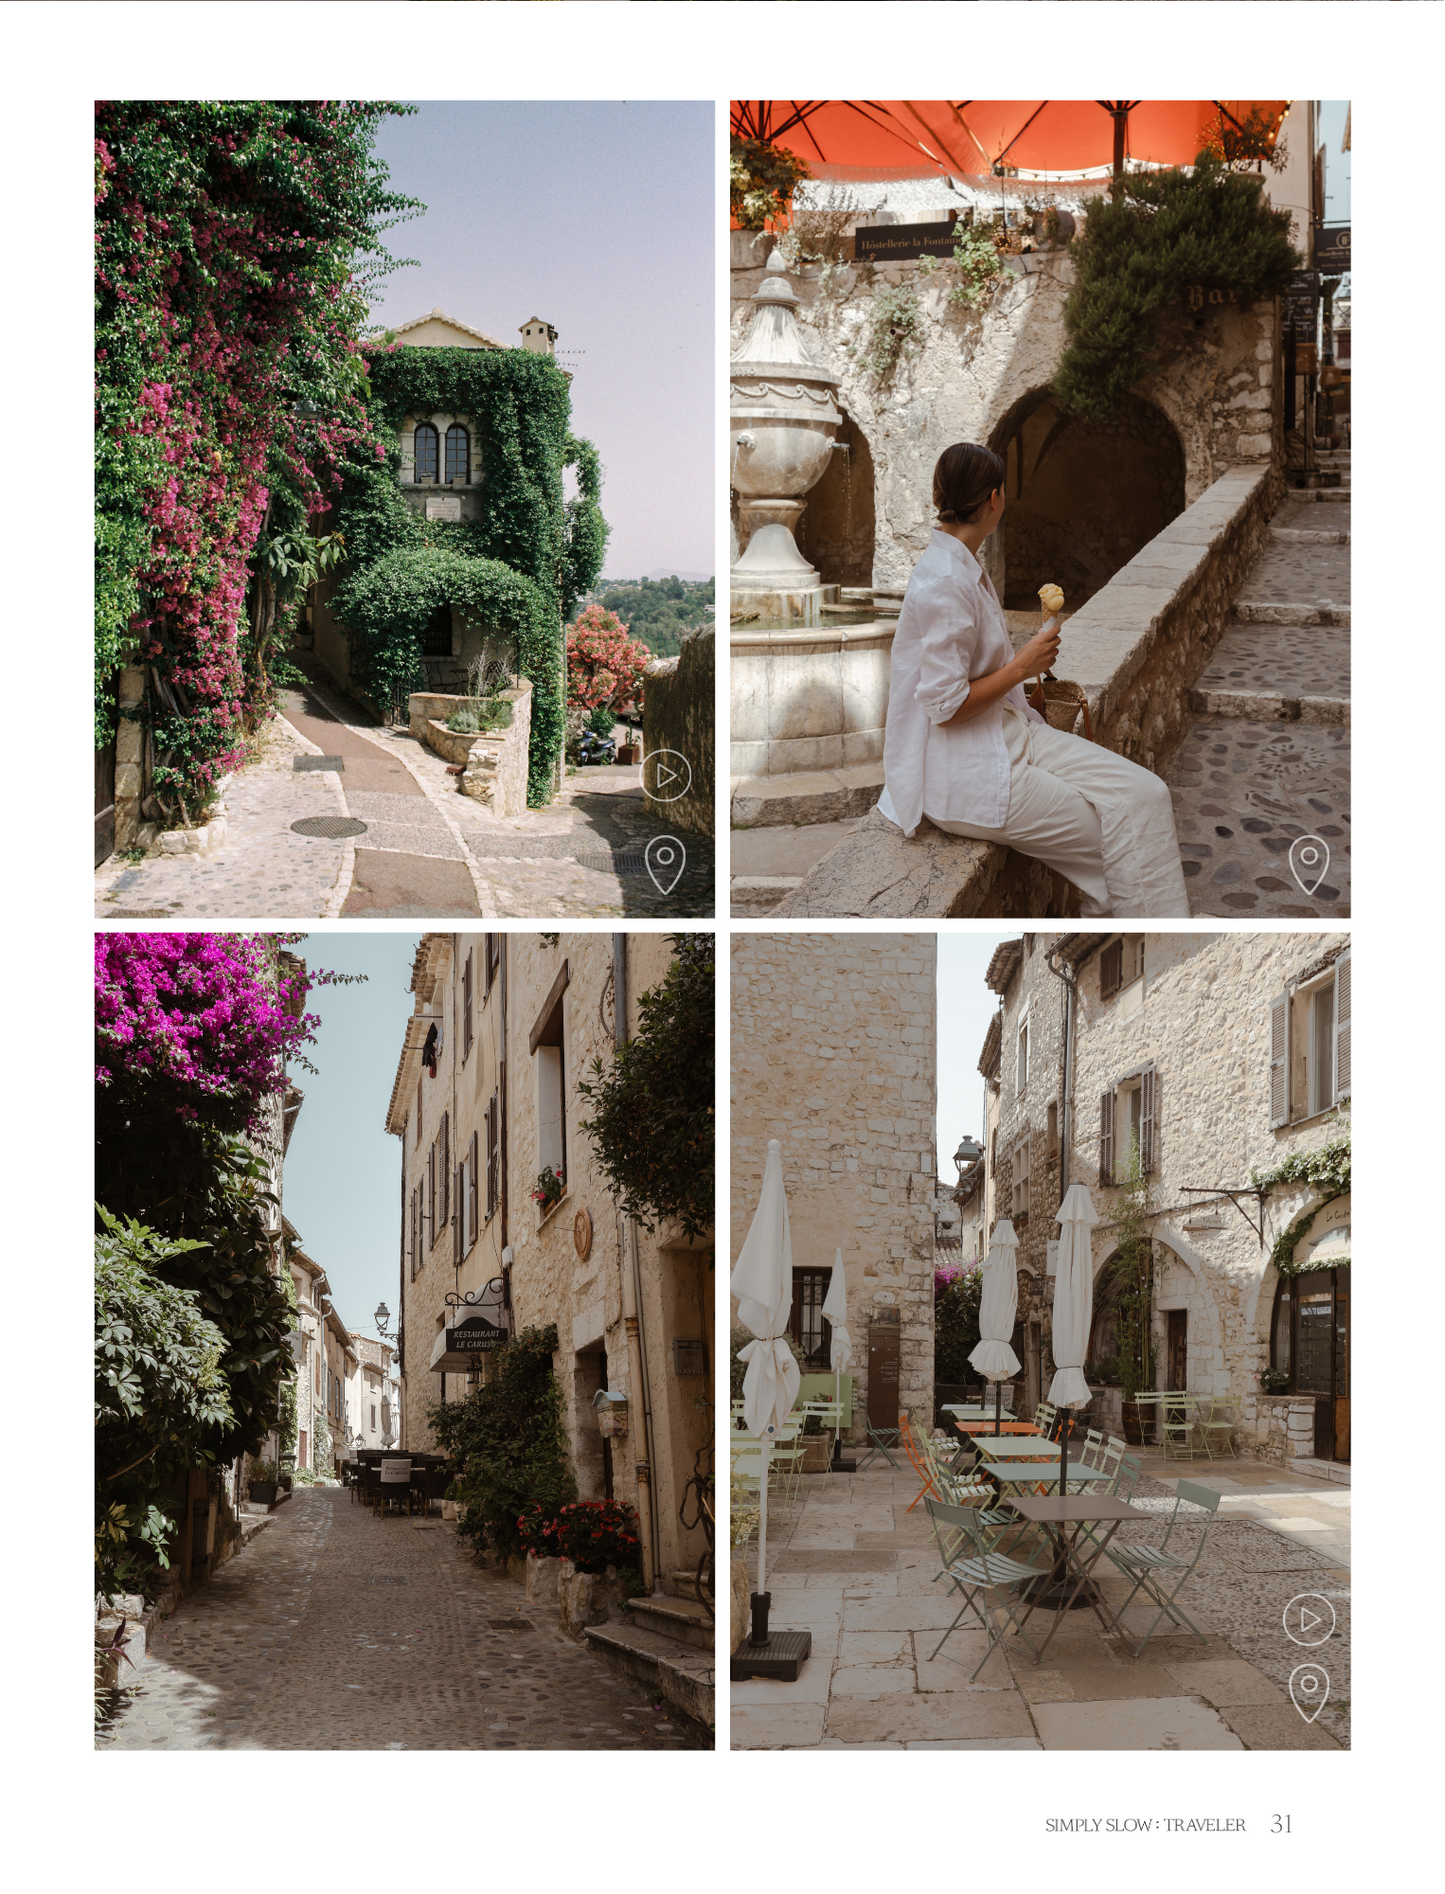 A Guide to the French Riviera & Provence - a page with photos from Saint-Paul-de-Vence, by Simply Slow Traveler